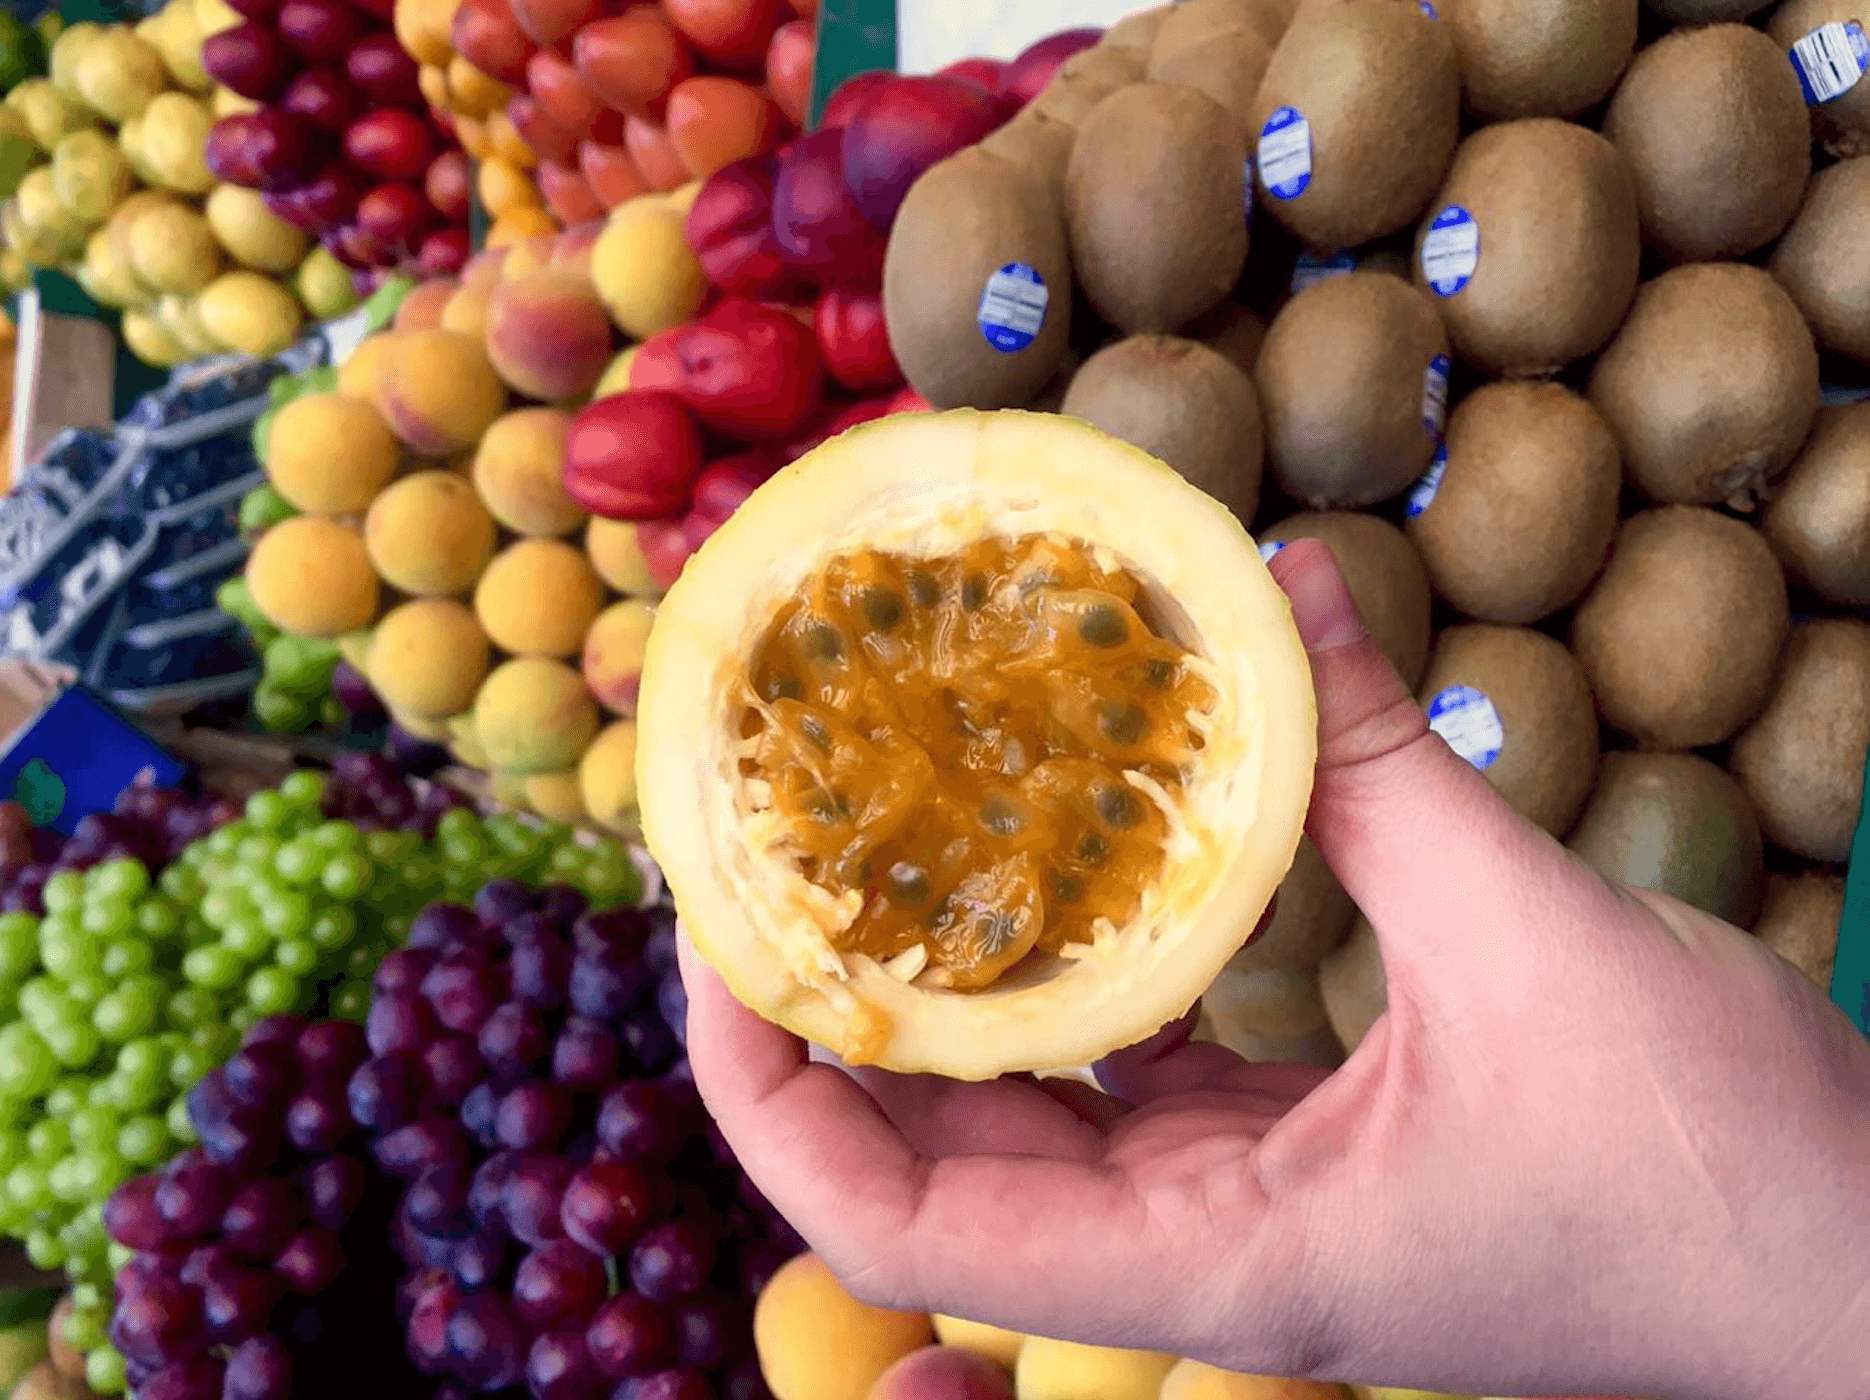 A hand holds a halved passion fruit with seeds visible. In the background, there are various fruits including kiwis, grapes, and peaches displayed at a market—a perfect snapshot of the vibrant produce you can explore on Bogotá city tours.